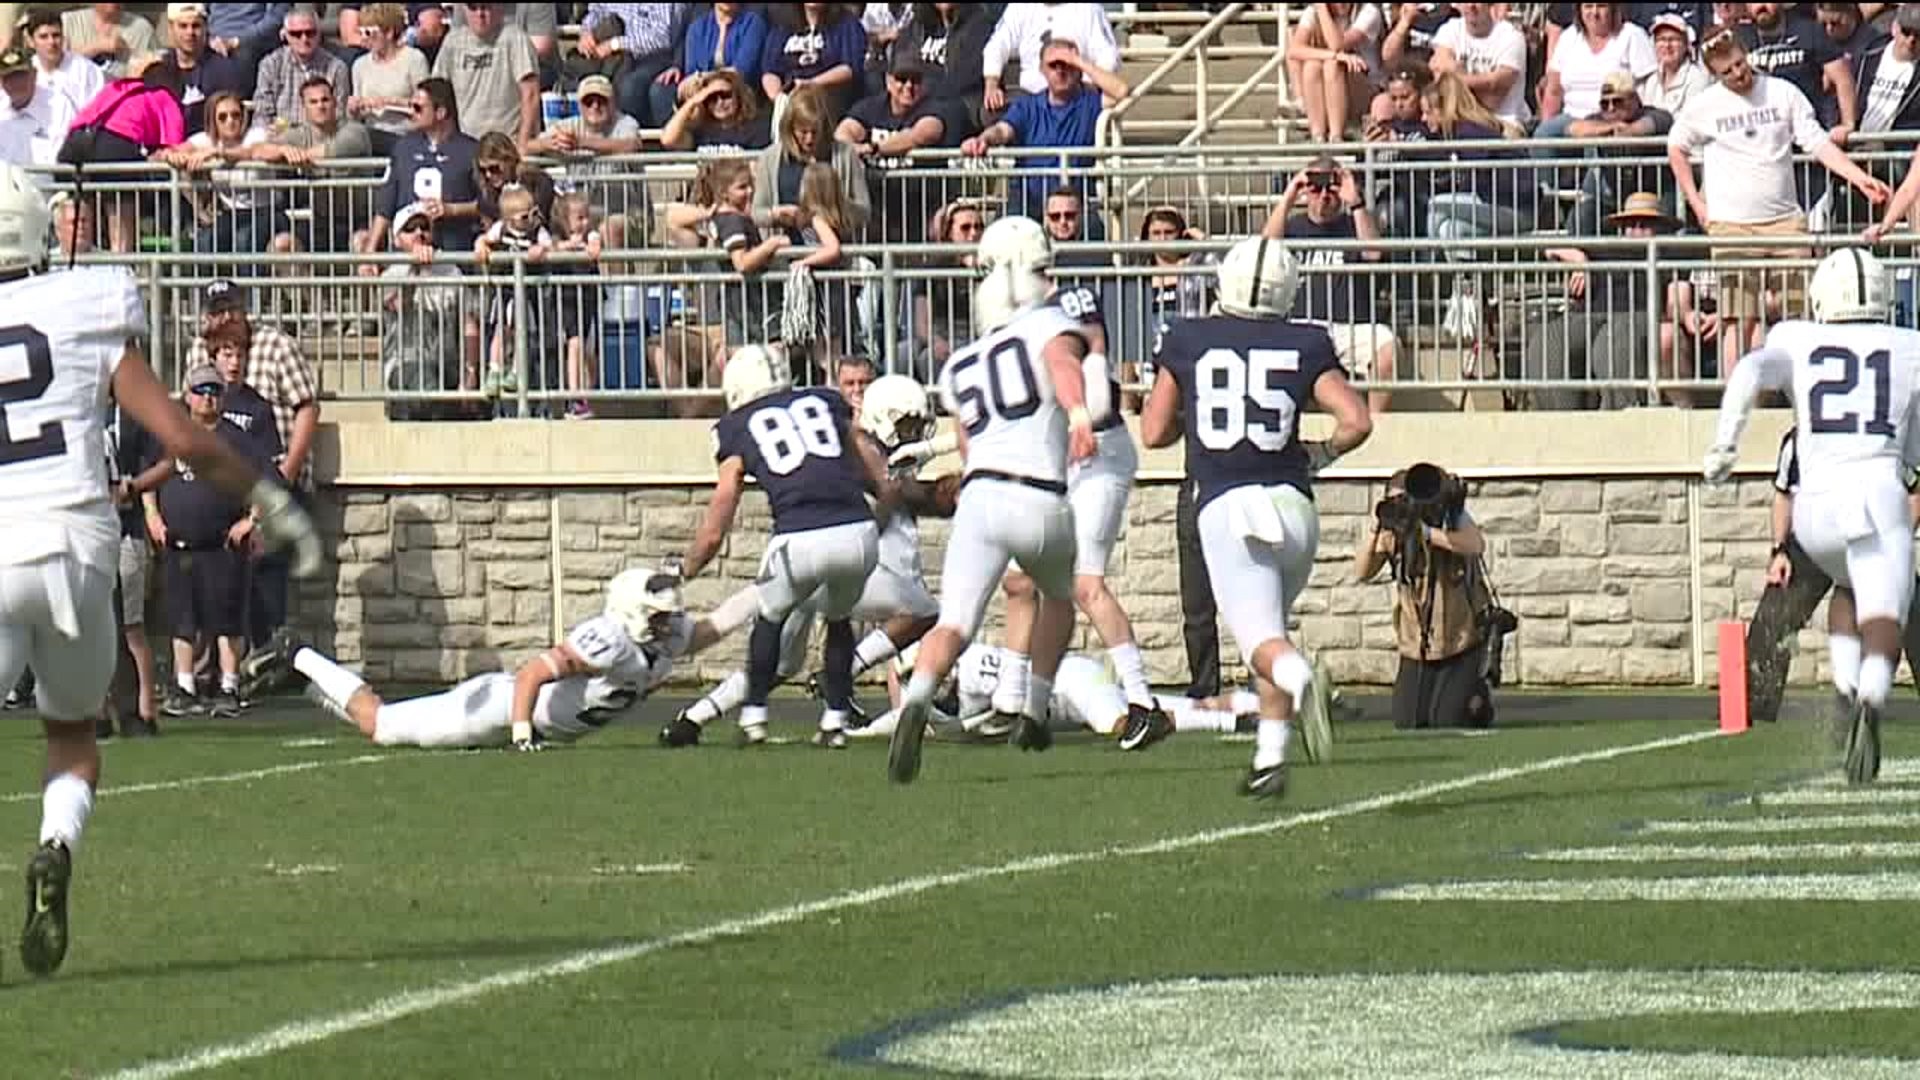 No Nittany Lion Surprises On Offense In Blue-White Game